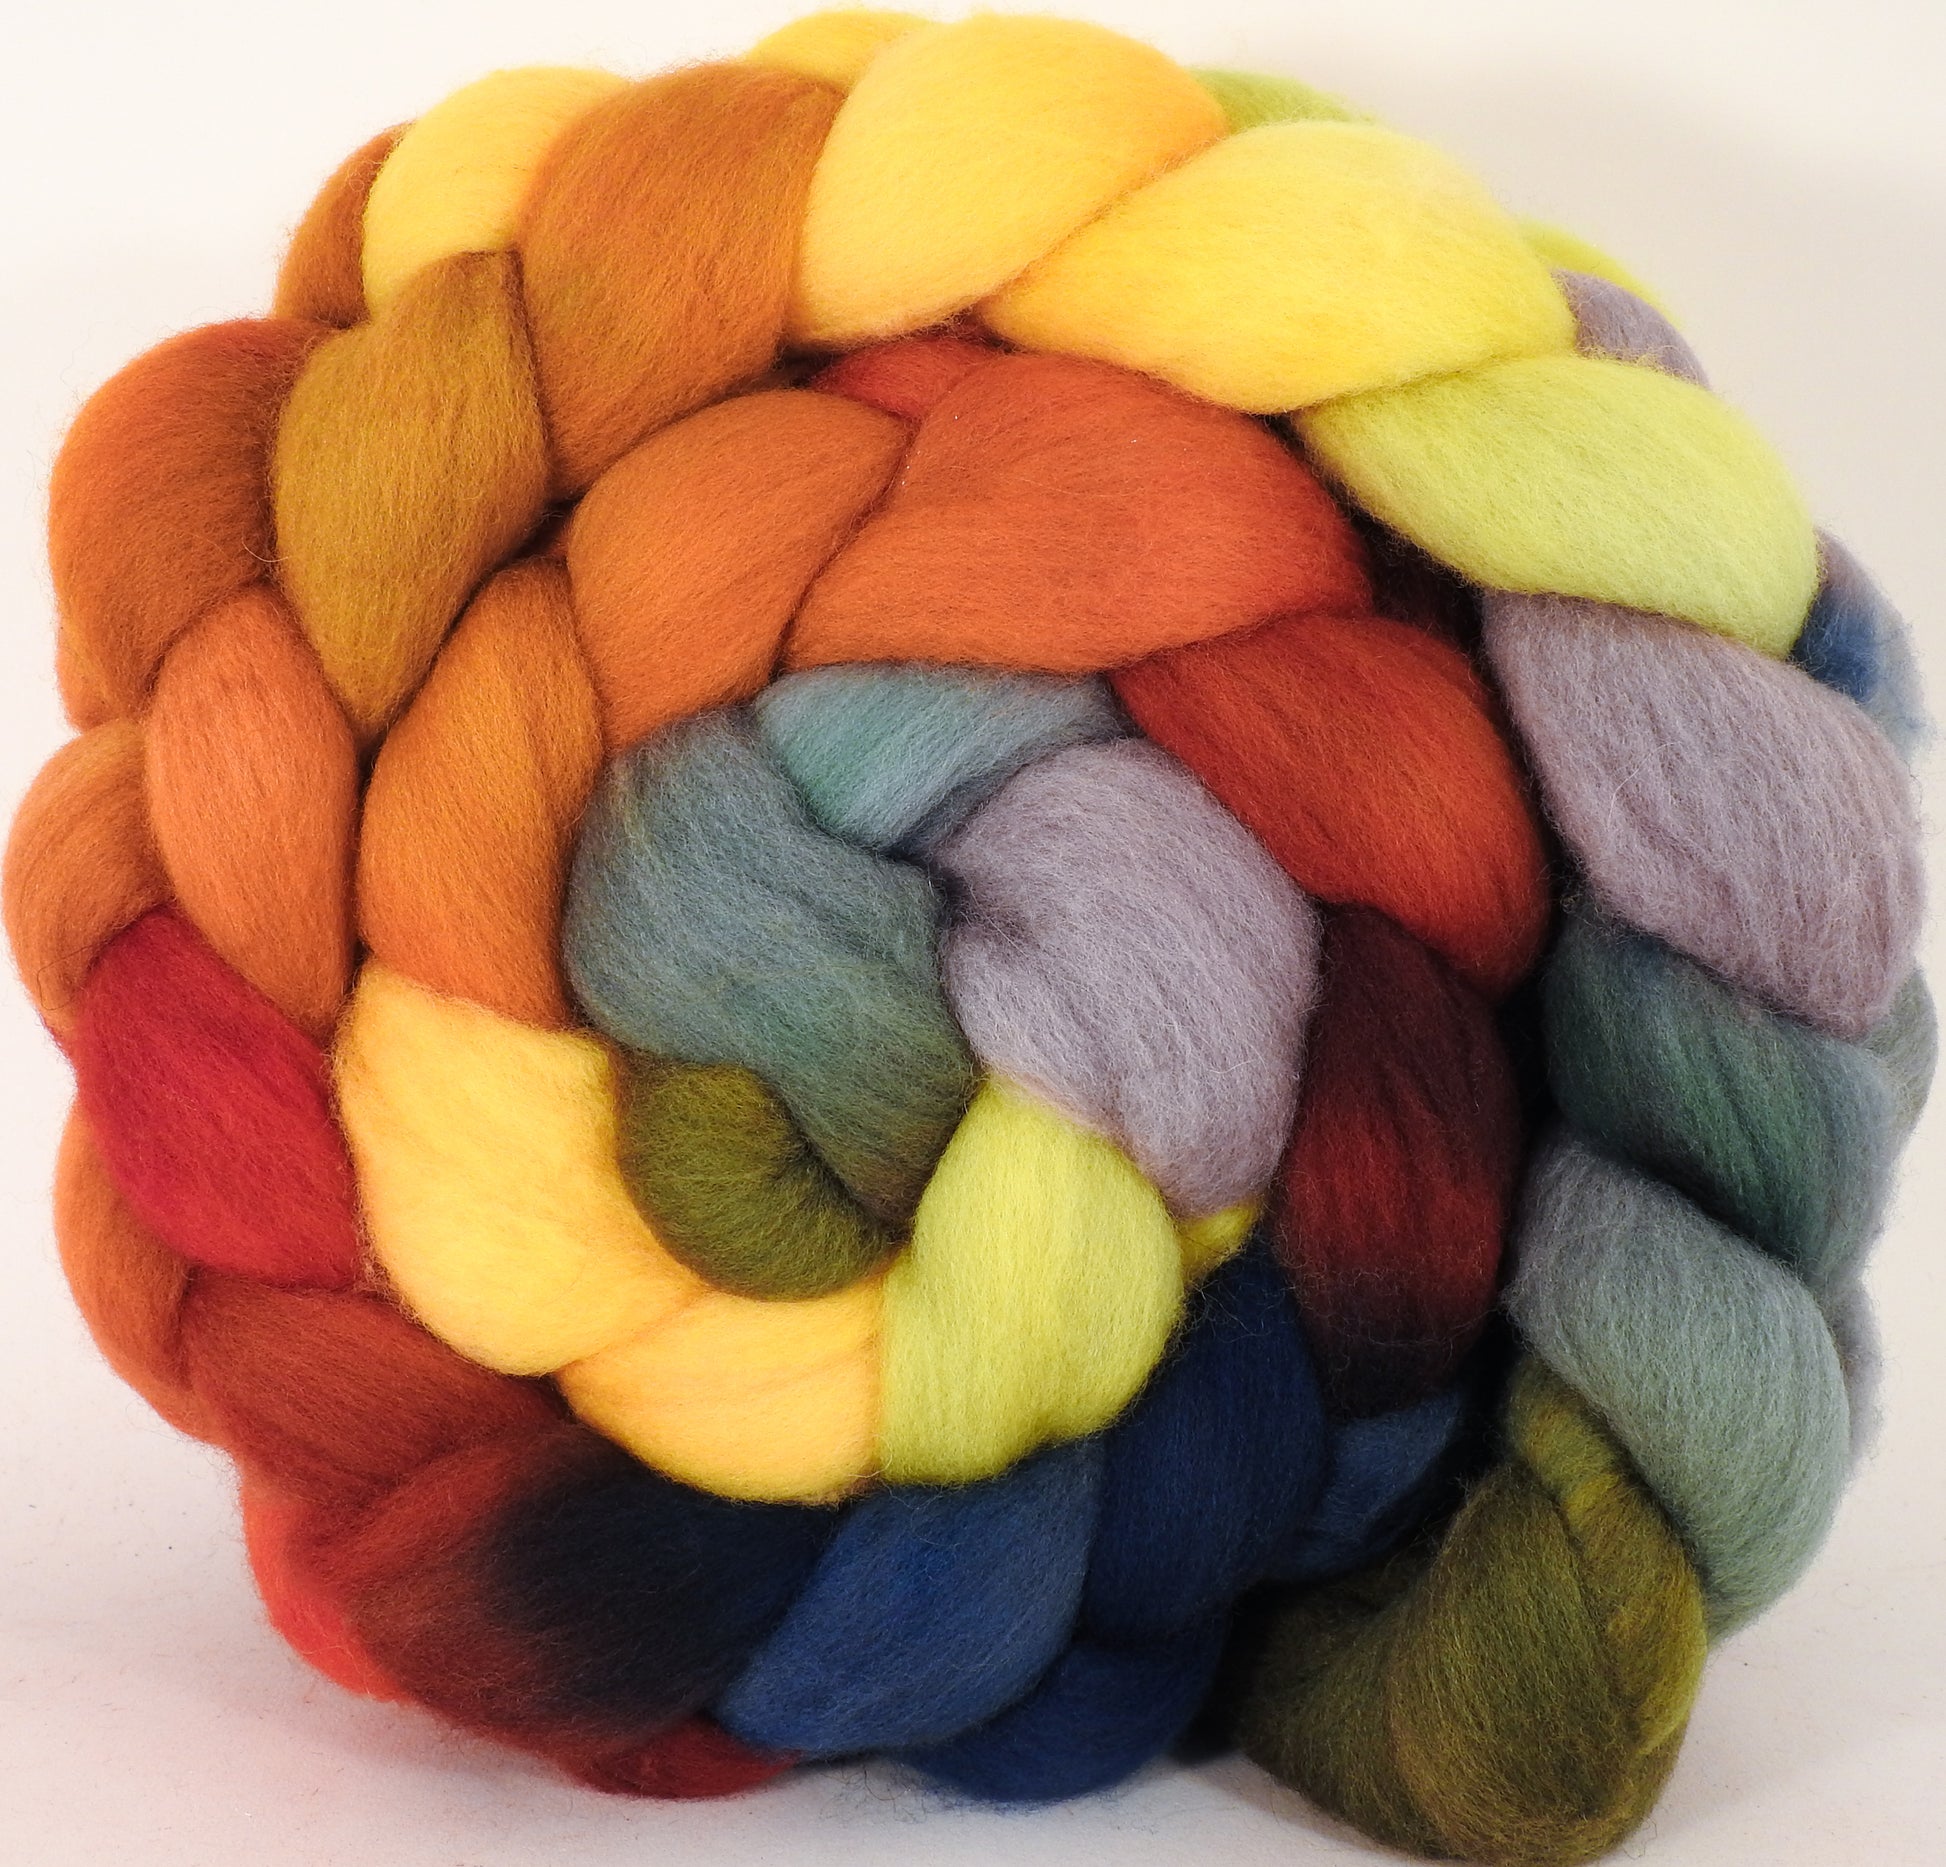 Hand dyed top for spinning -Gourds- Organic Polwarth - Inglenook Fibers